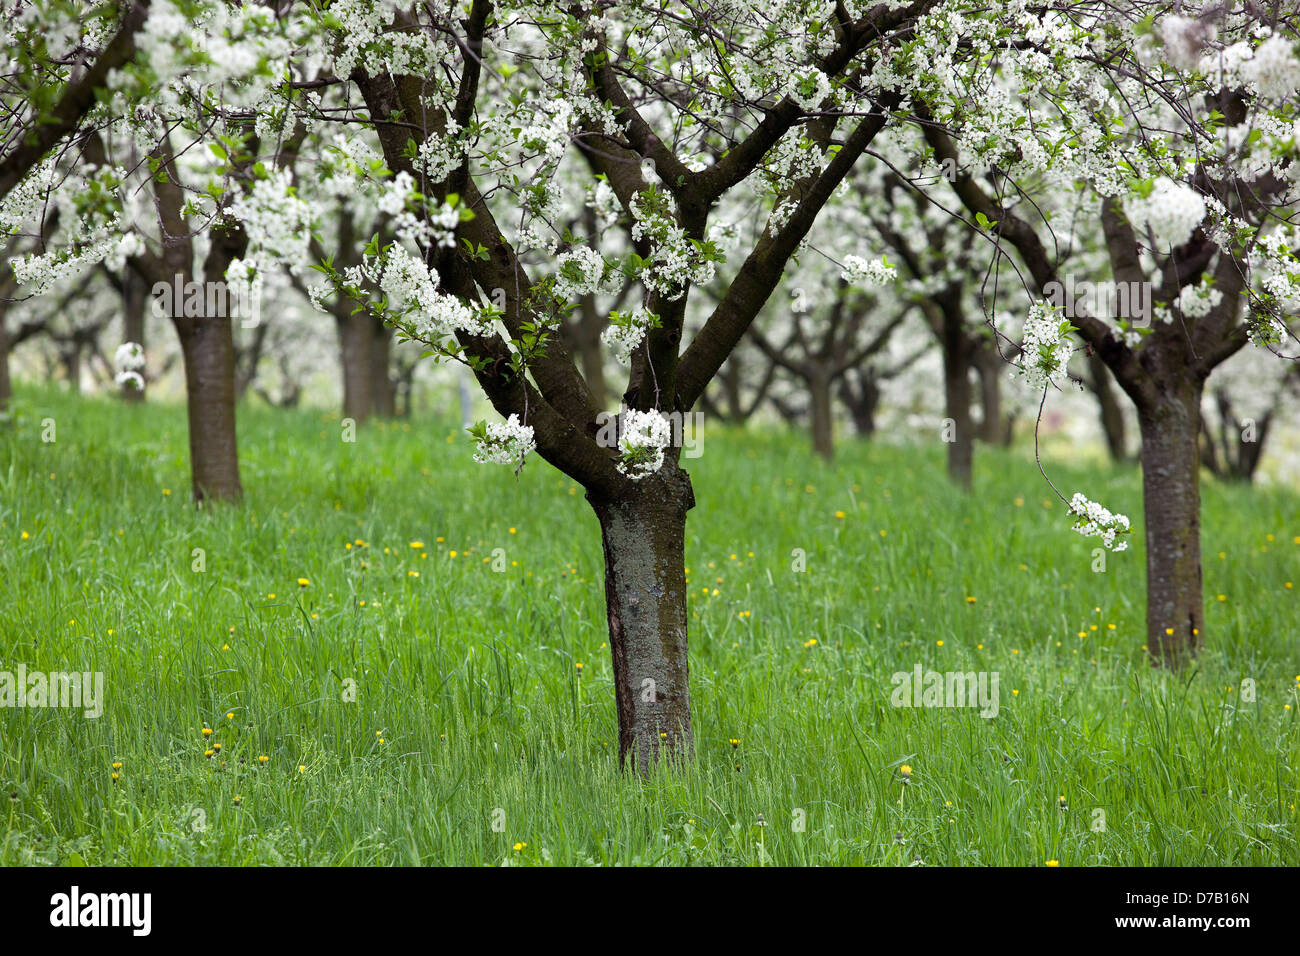 Cherry trees orchard blooming, lawn Stock Photo